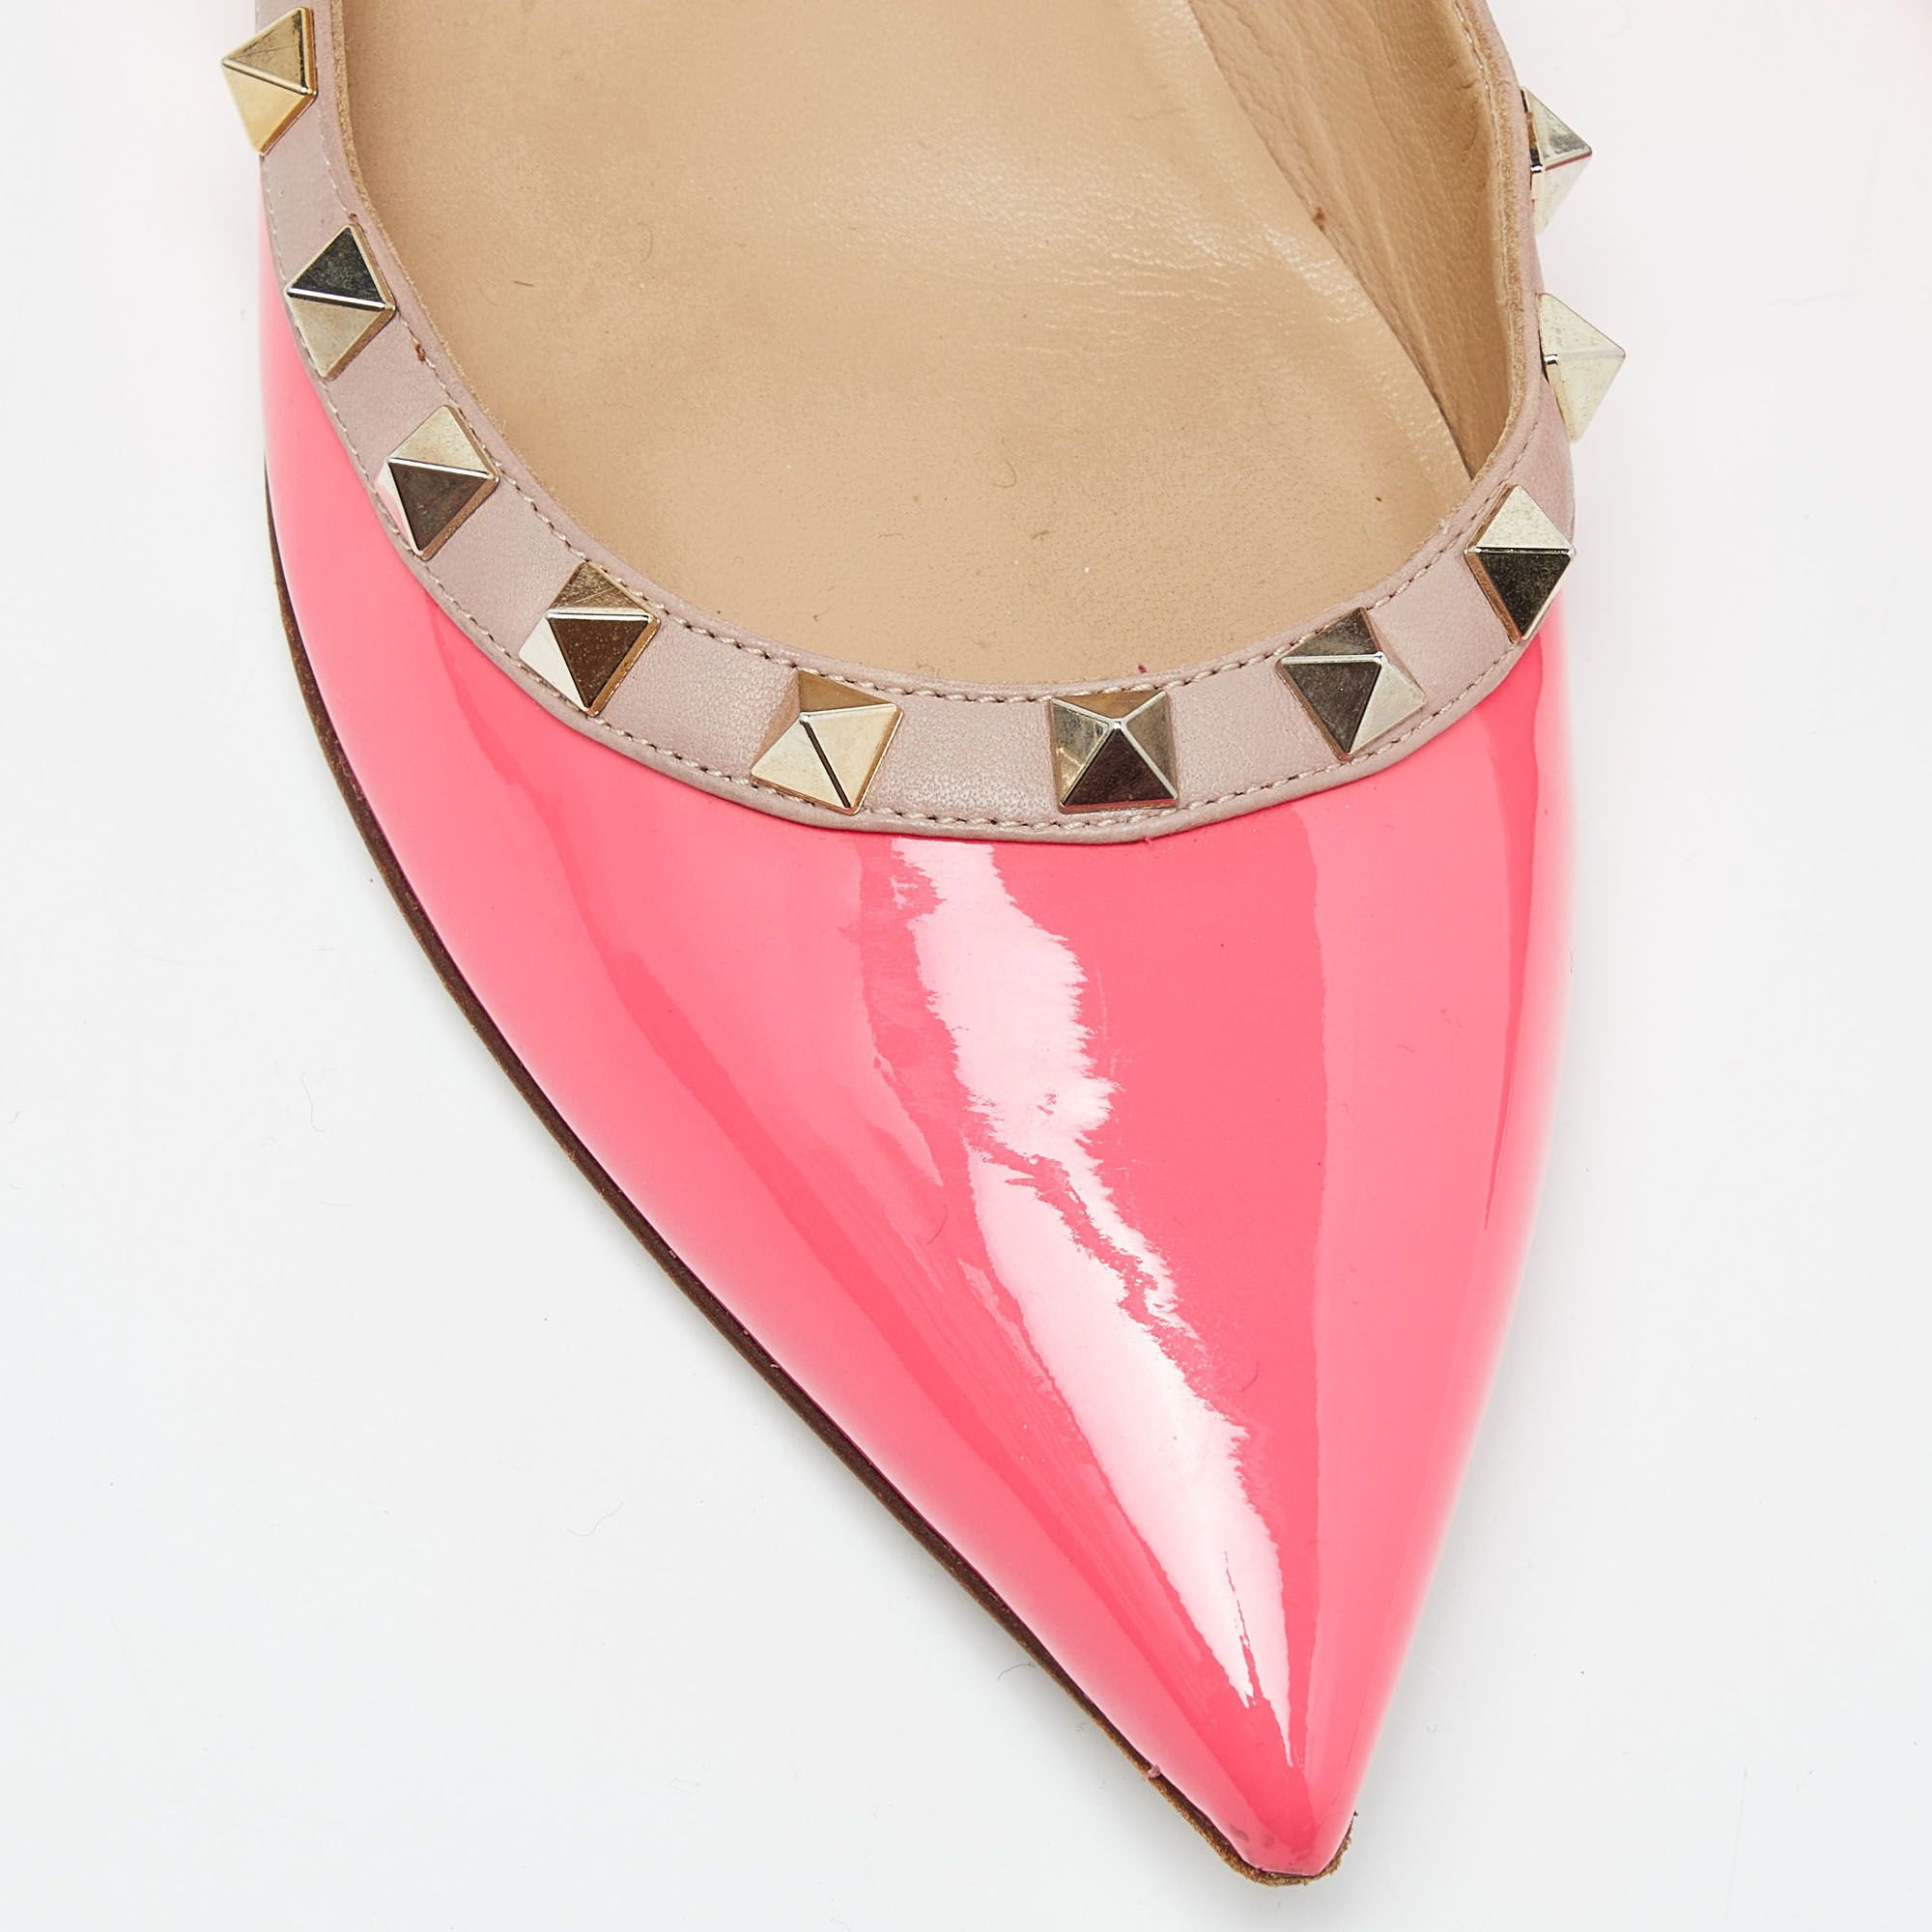 Valentino Pink/Beige Patent Leather Rockstud Pointed Toe Ballet Flats Size 40